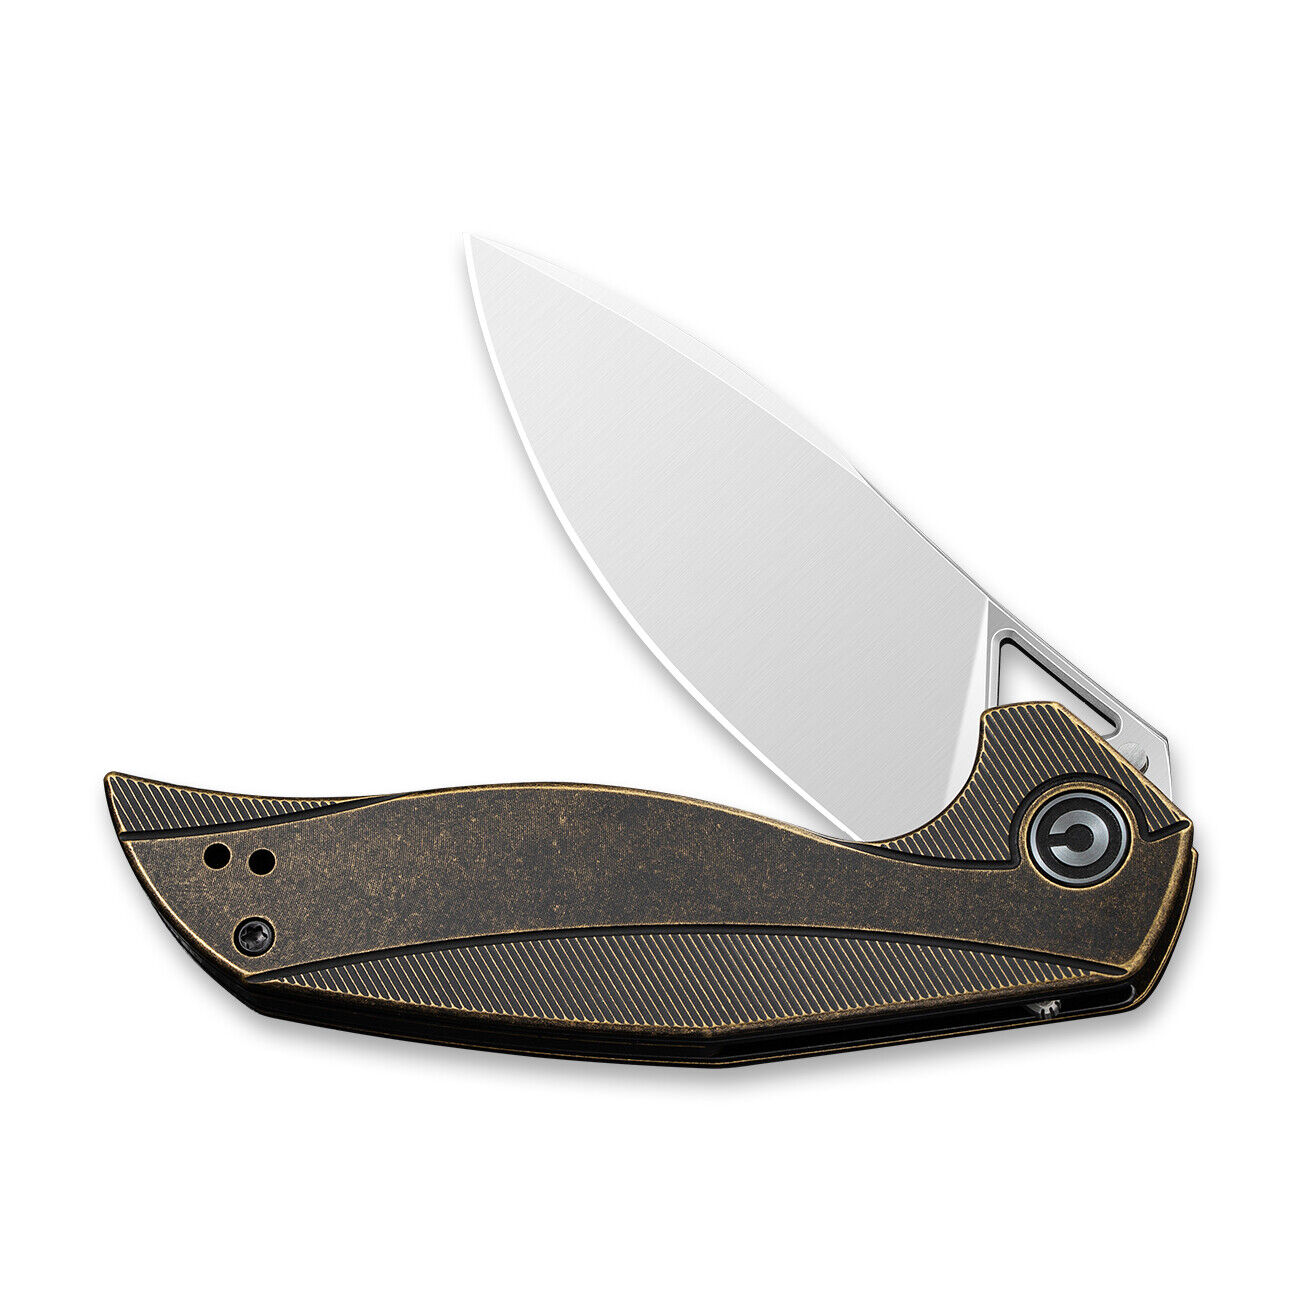 Civivi Knives Anthropos Liner Lock C903D D2 Stainless Brass Stainless